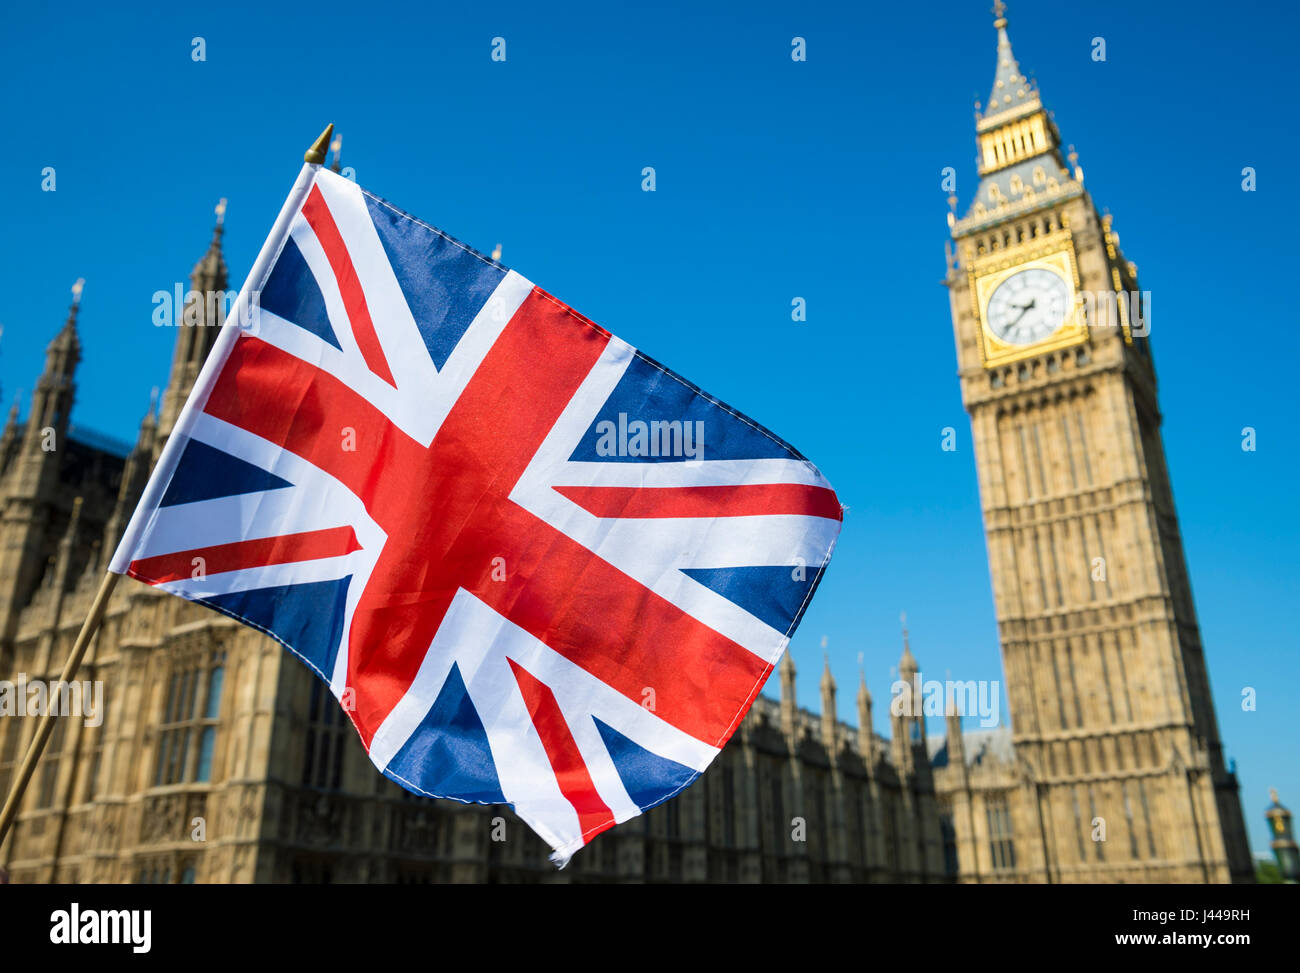 United Kingdom flag waving in bright blue sky in front of the Houses of Parliament at Westminster Palace with Big Ben Stock Photo